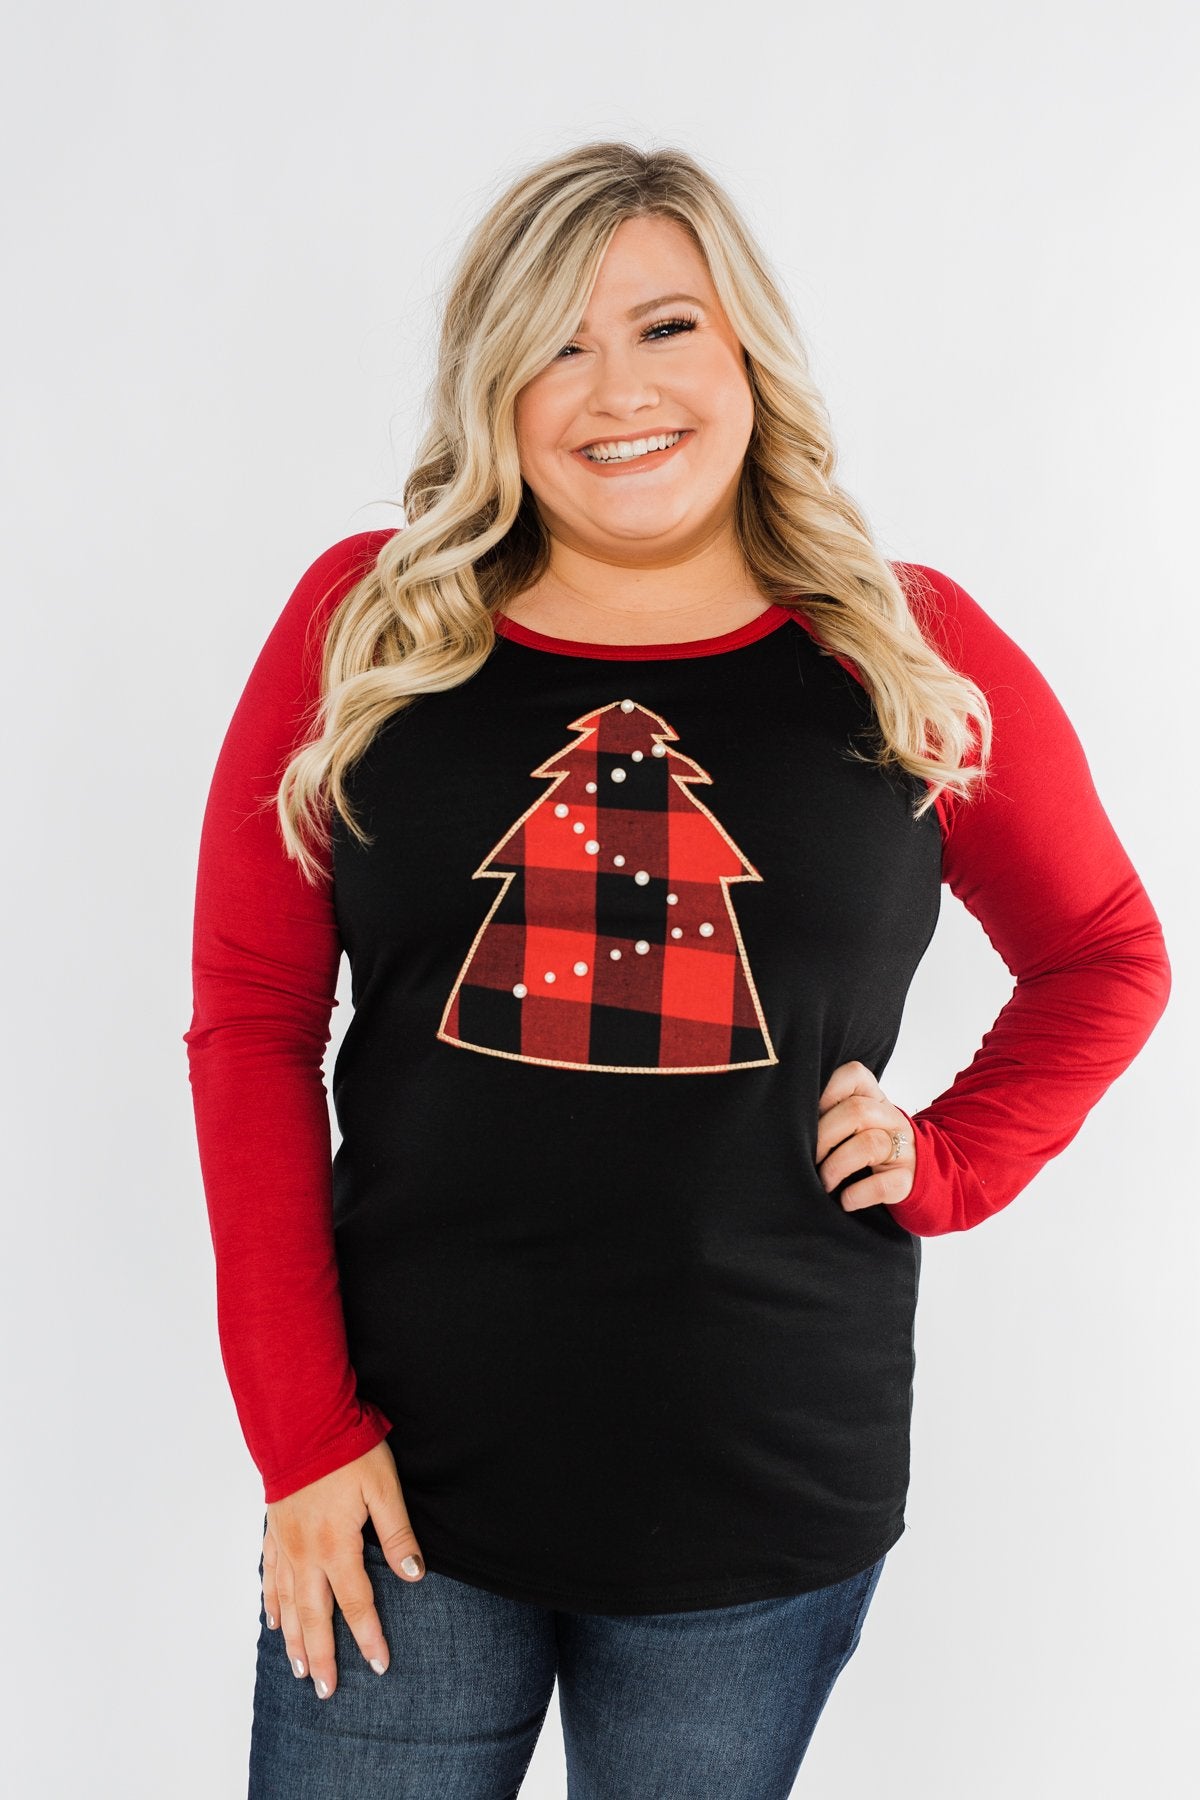 Around The Christmas Tree Graphic Top- Black & Holiday Red